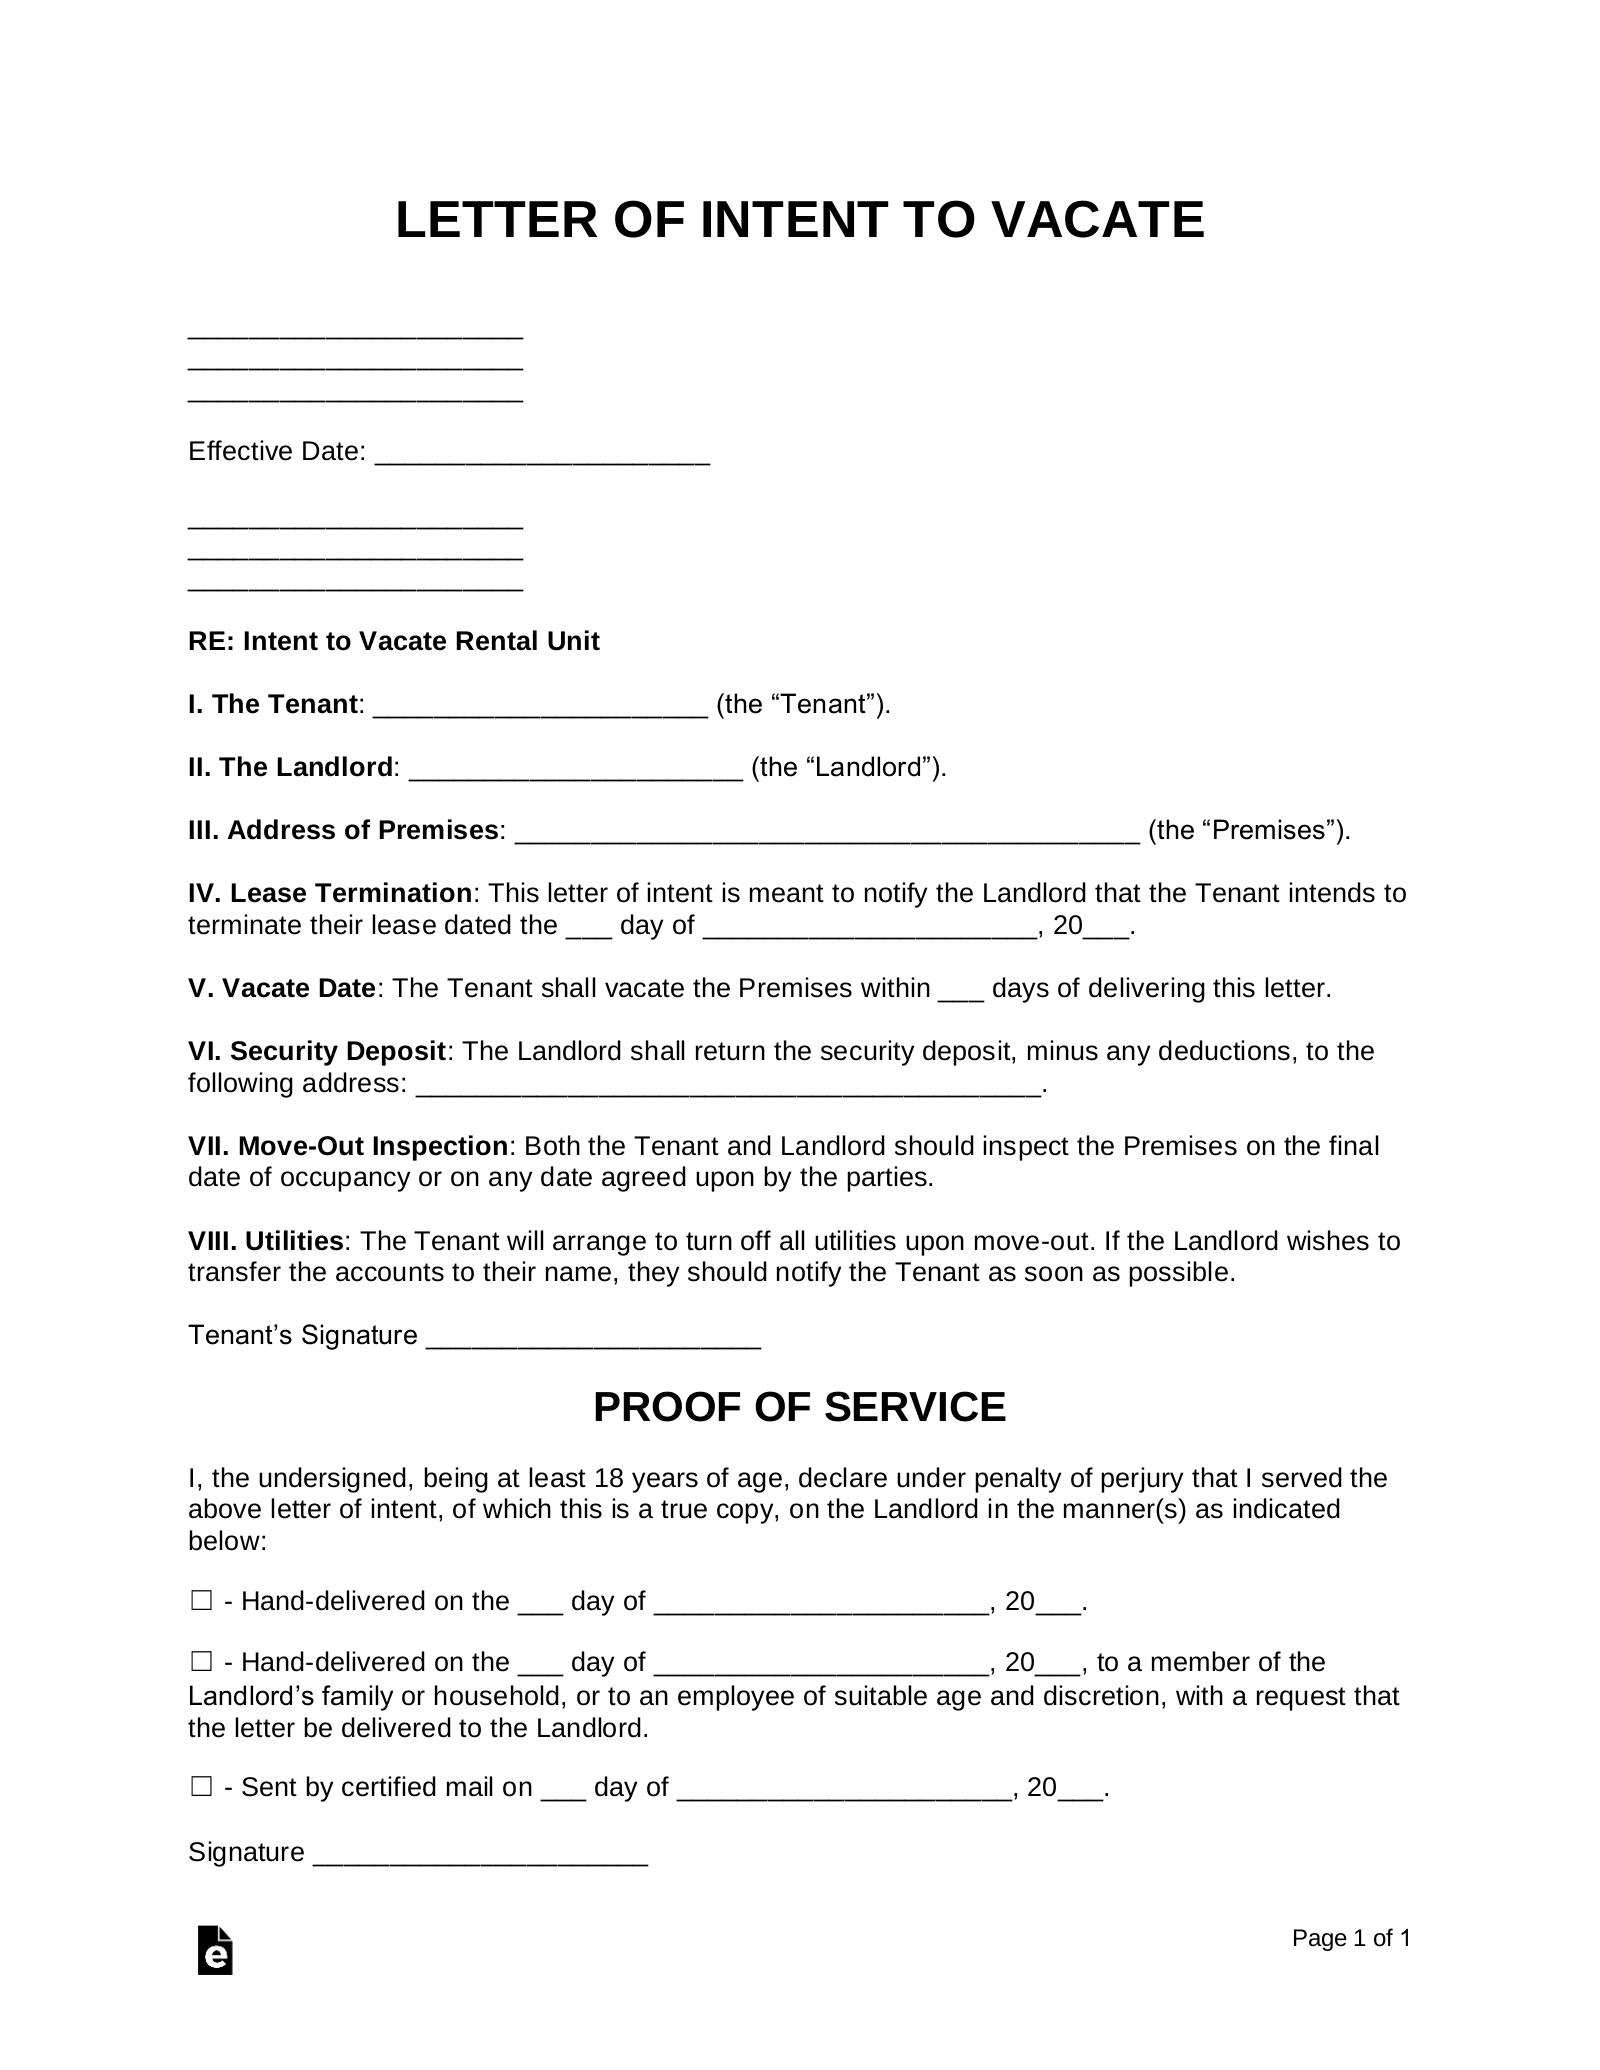 Letter of Intent to Vacate Rental Property